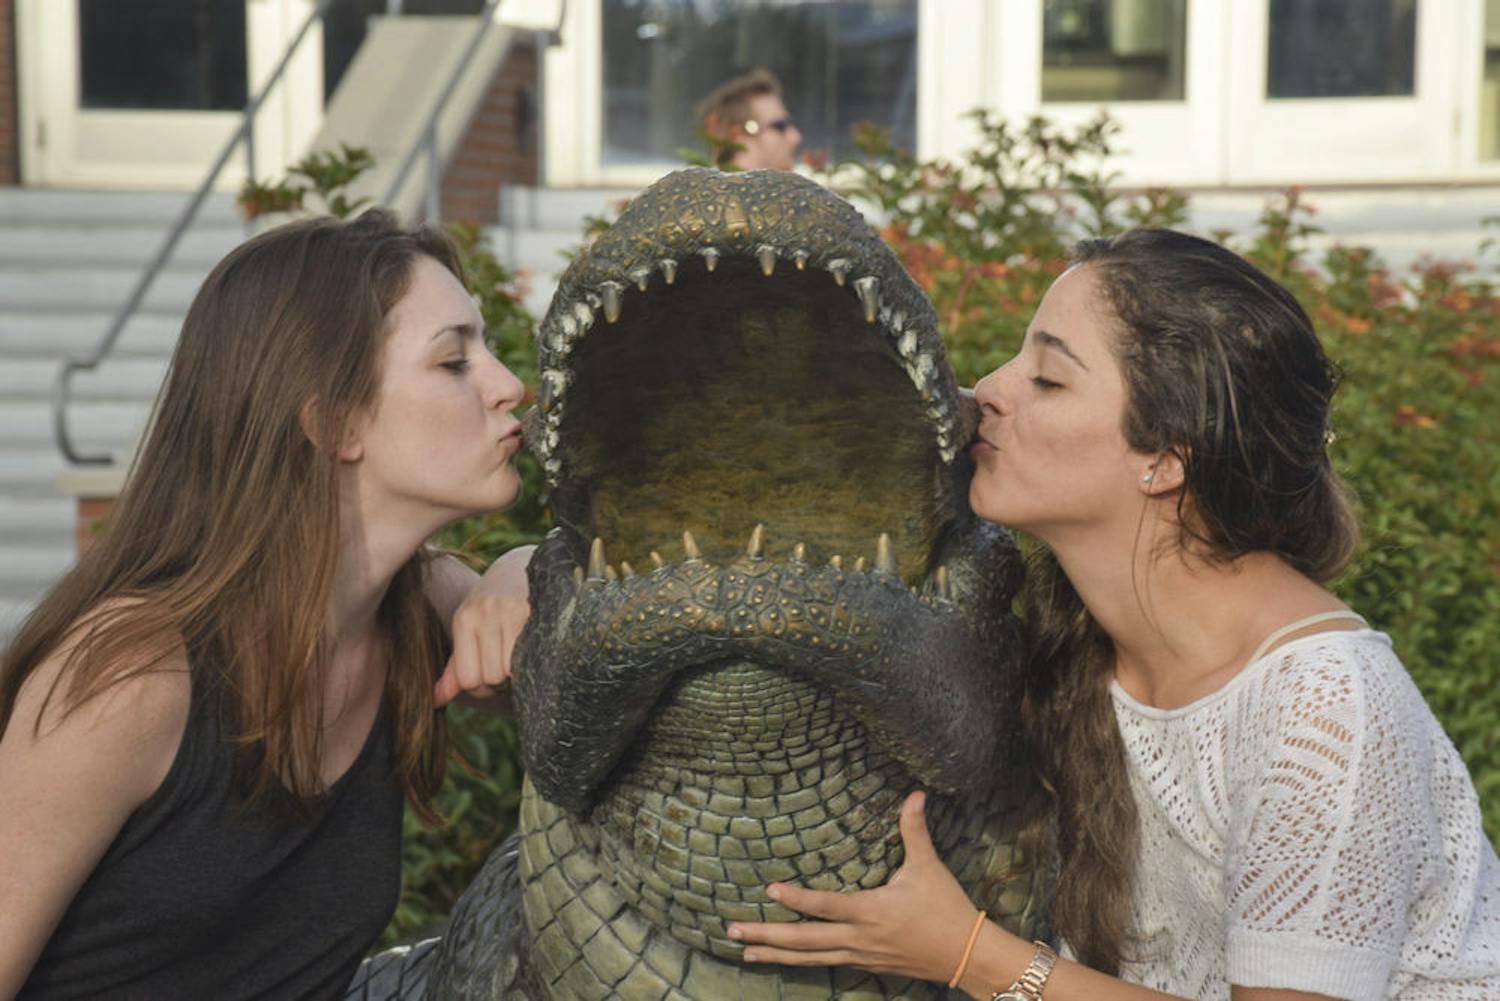 Sydney Folsom, left, 23, and Sophia Saportas, 24, both UF civil engineering seniors, pose with the Bull Gator statue outside Ben Hill Griffin Stadium. Saportas said she’s very happy to finish her university years. “It’s about time,” Folsom said.